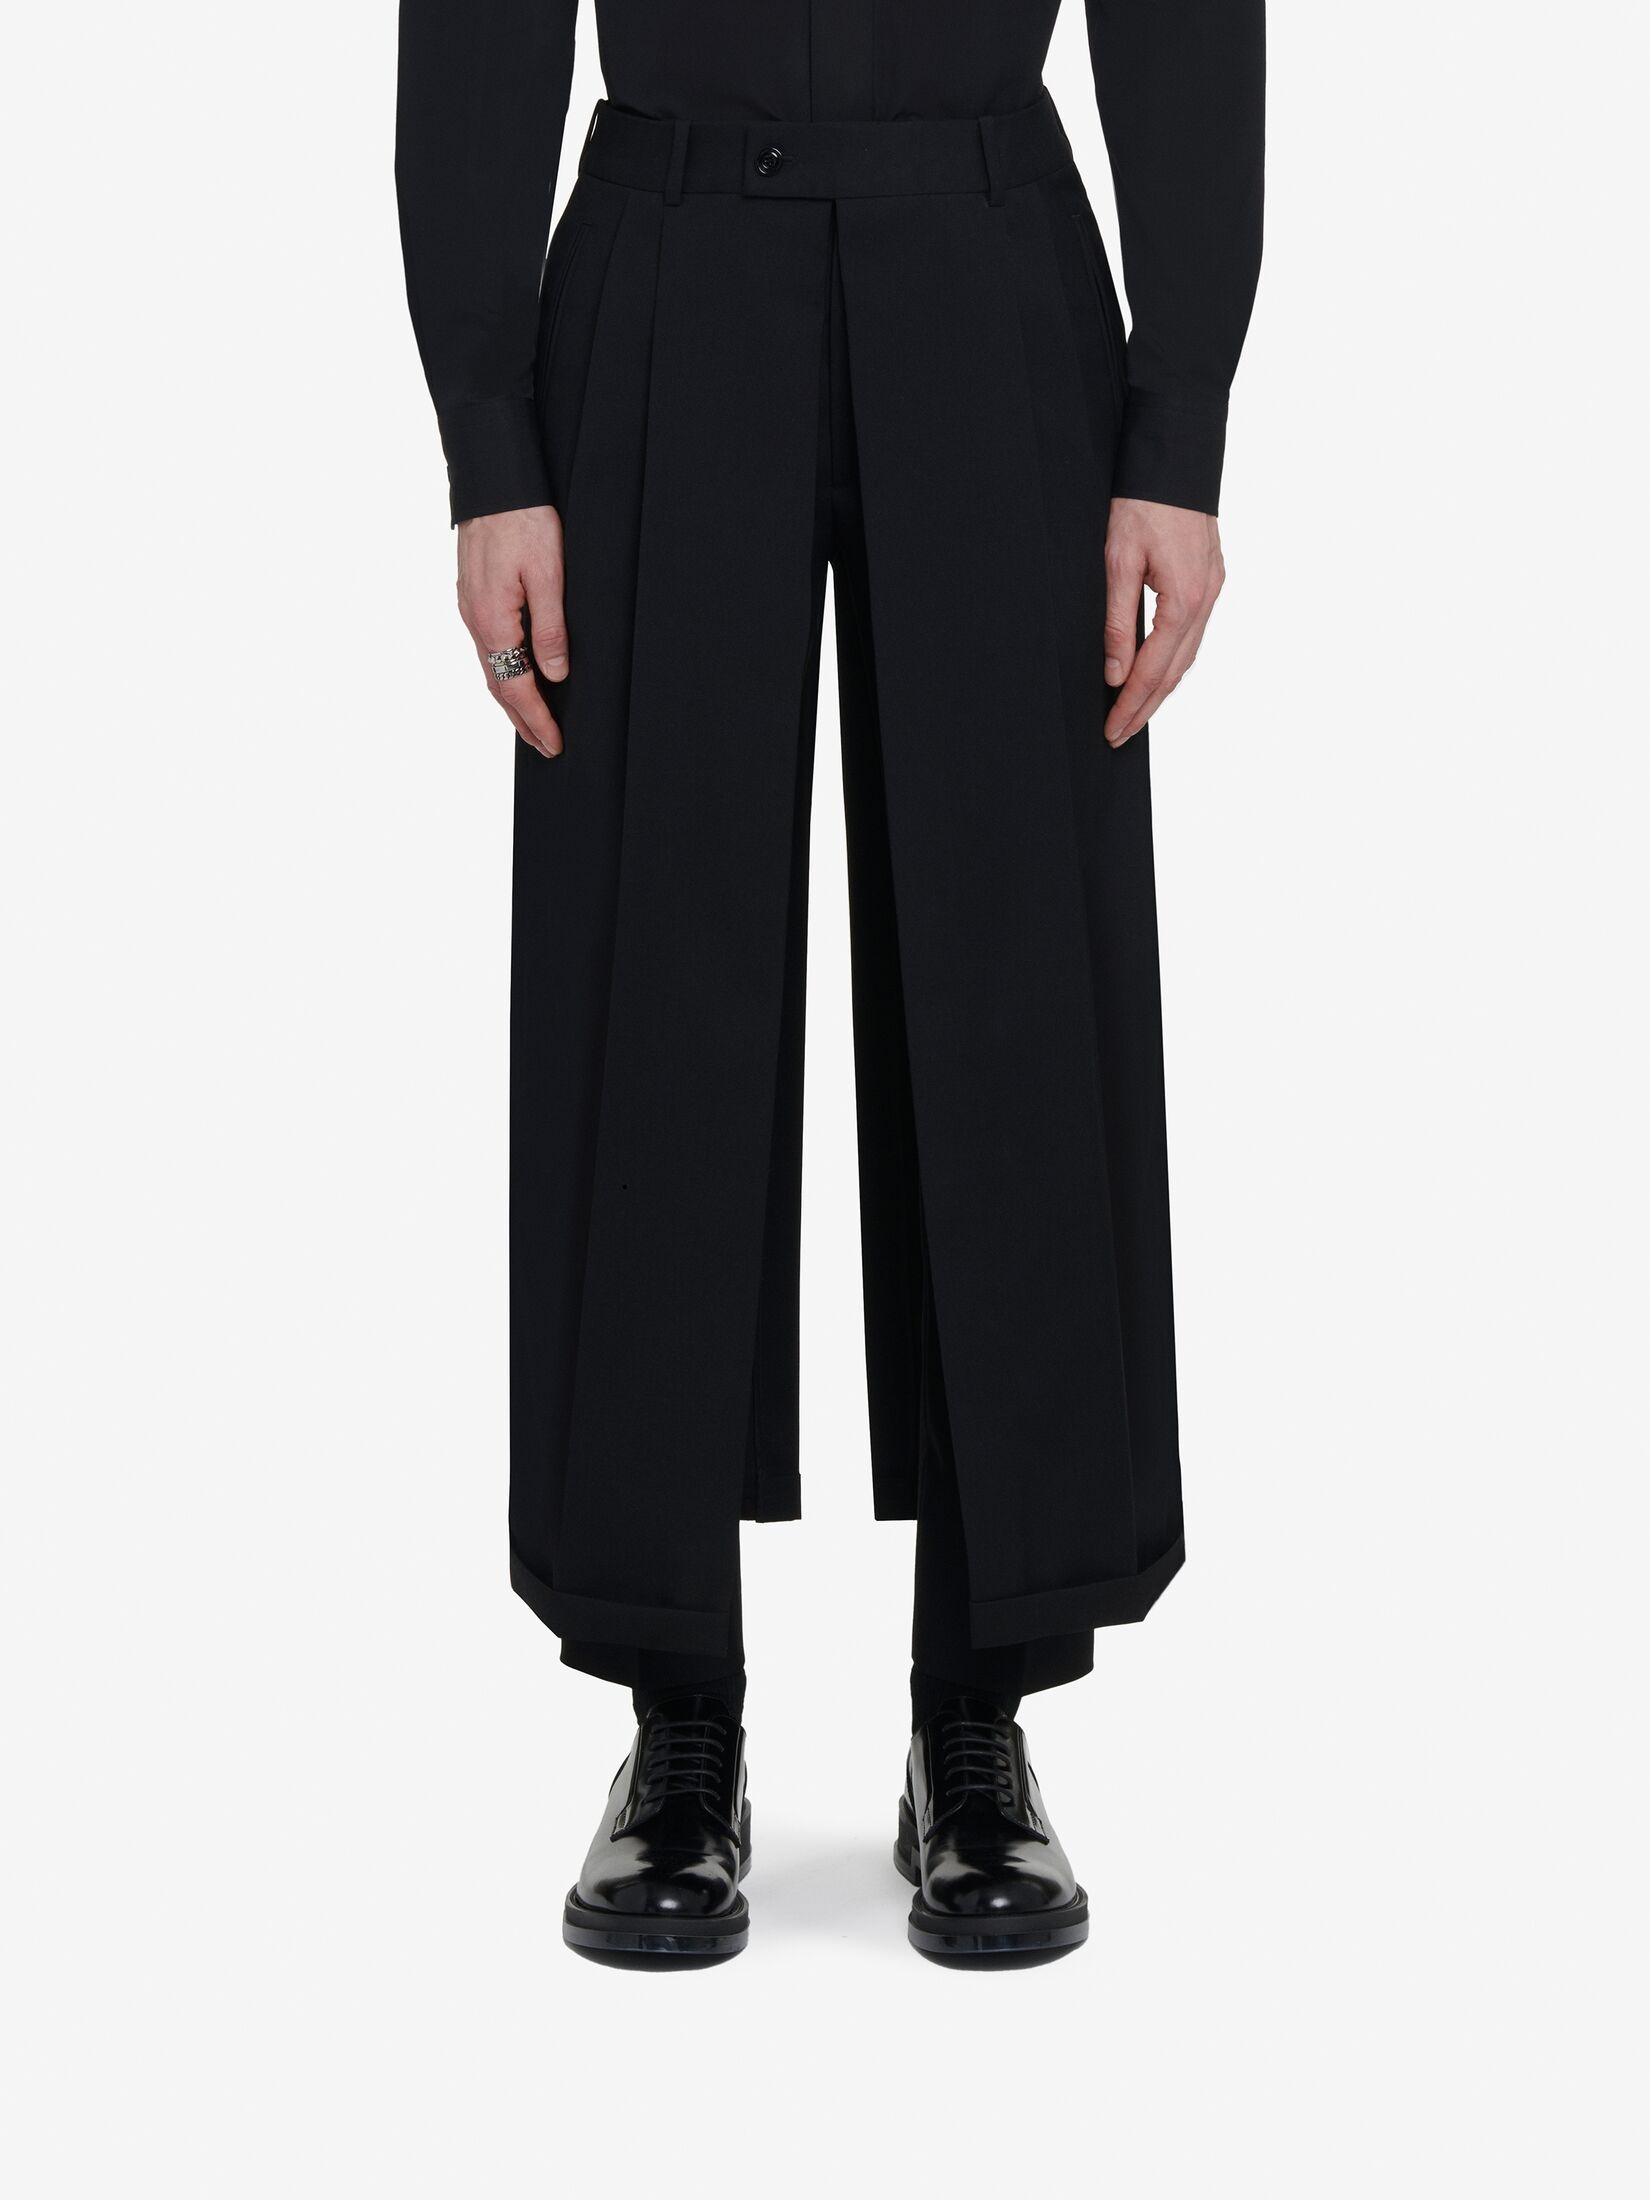 Men's Slashed Tailored Trousers in Black - 5